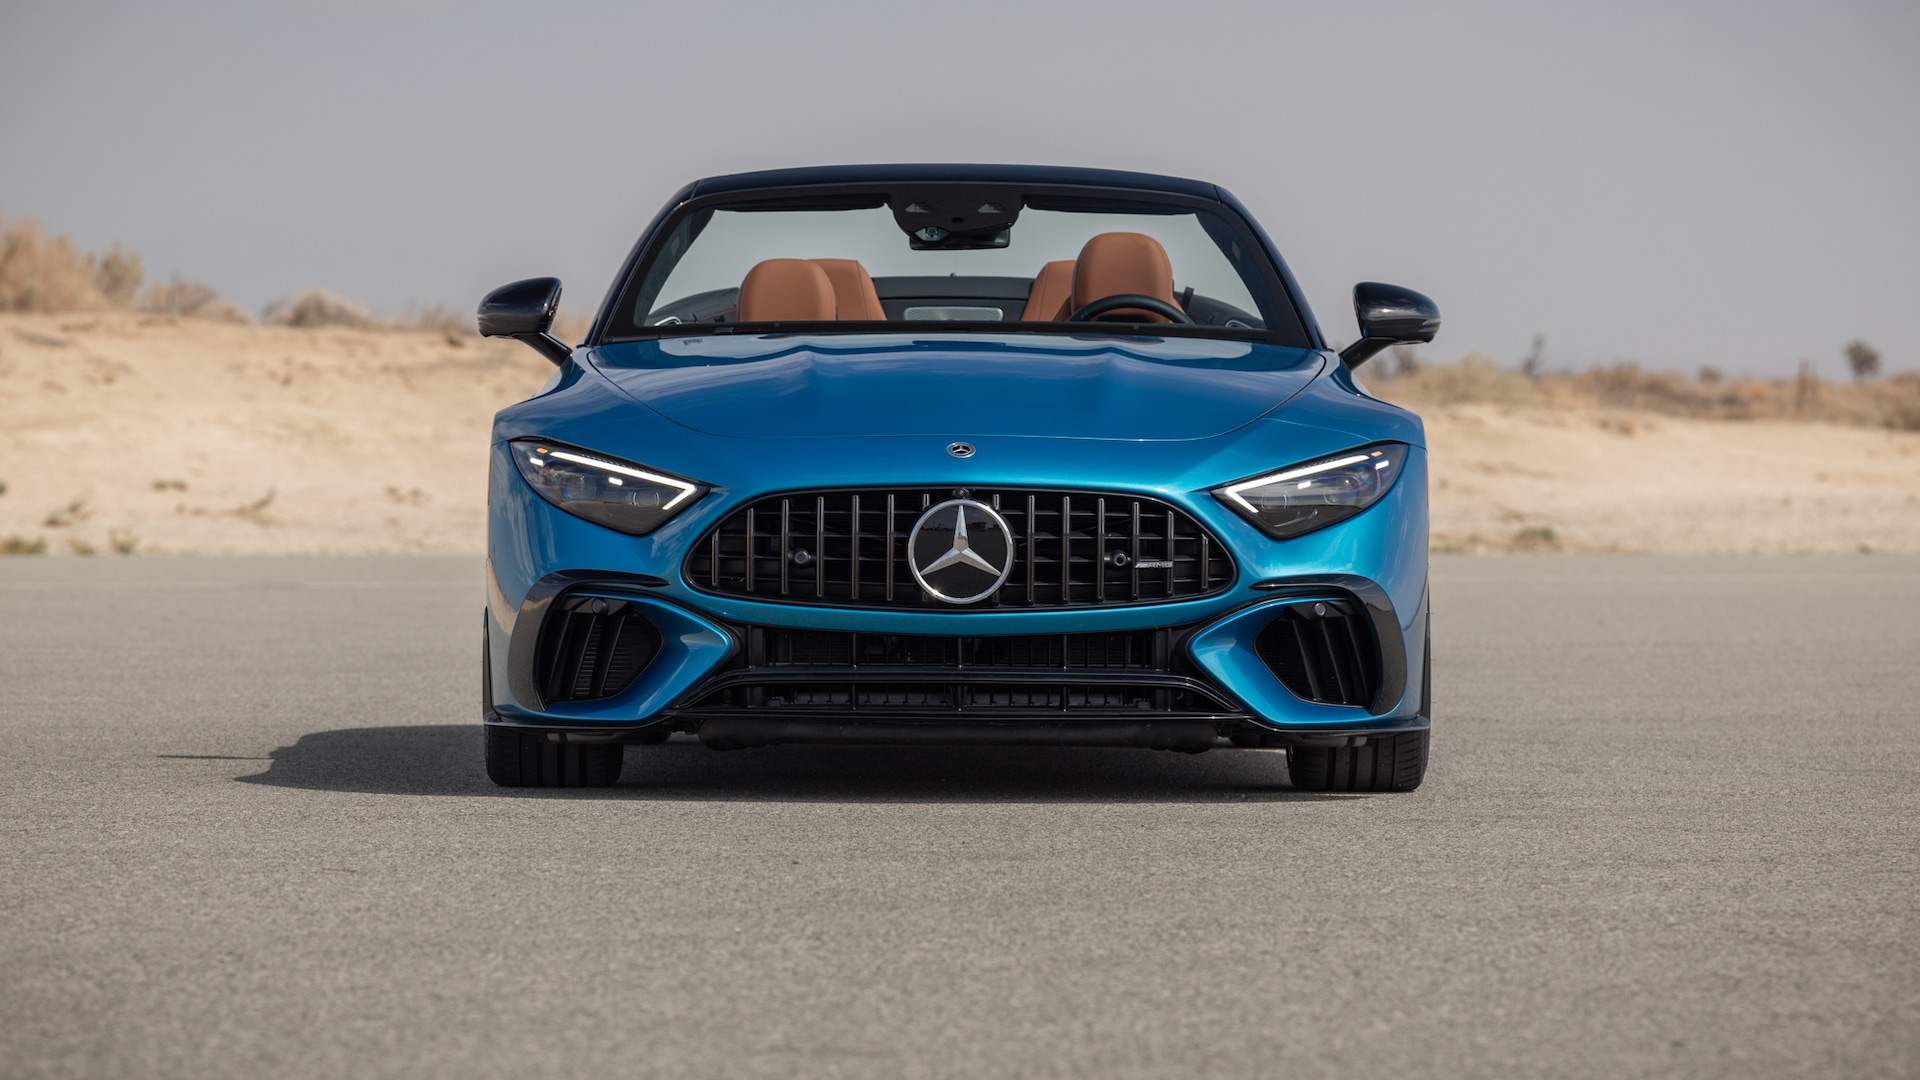 2022 Mercedes-AMG SL63 0–60 mph, ¼-Mile Tested: The Quickest SL Ever